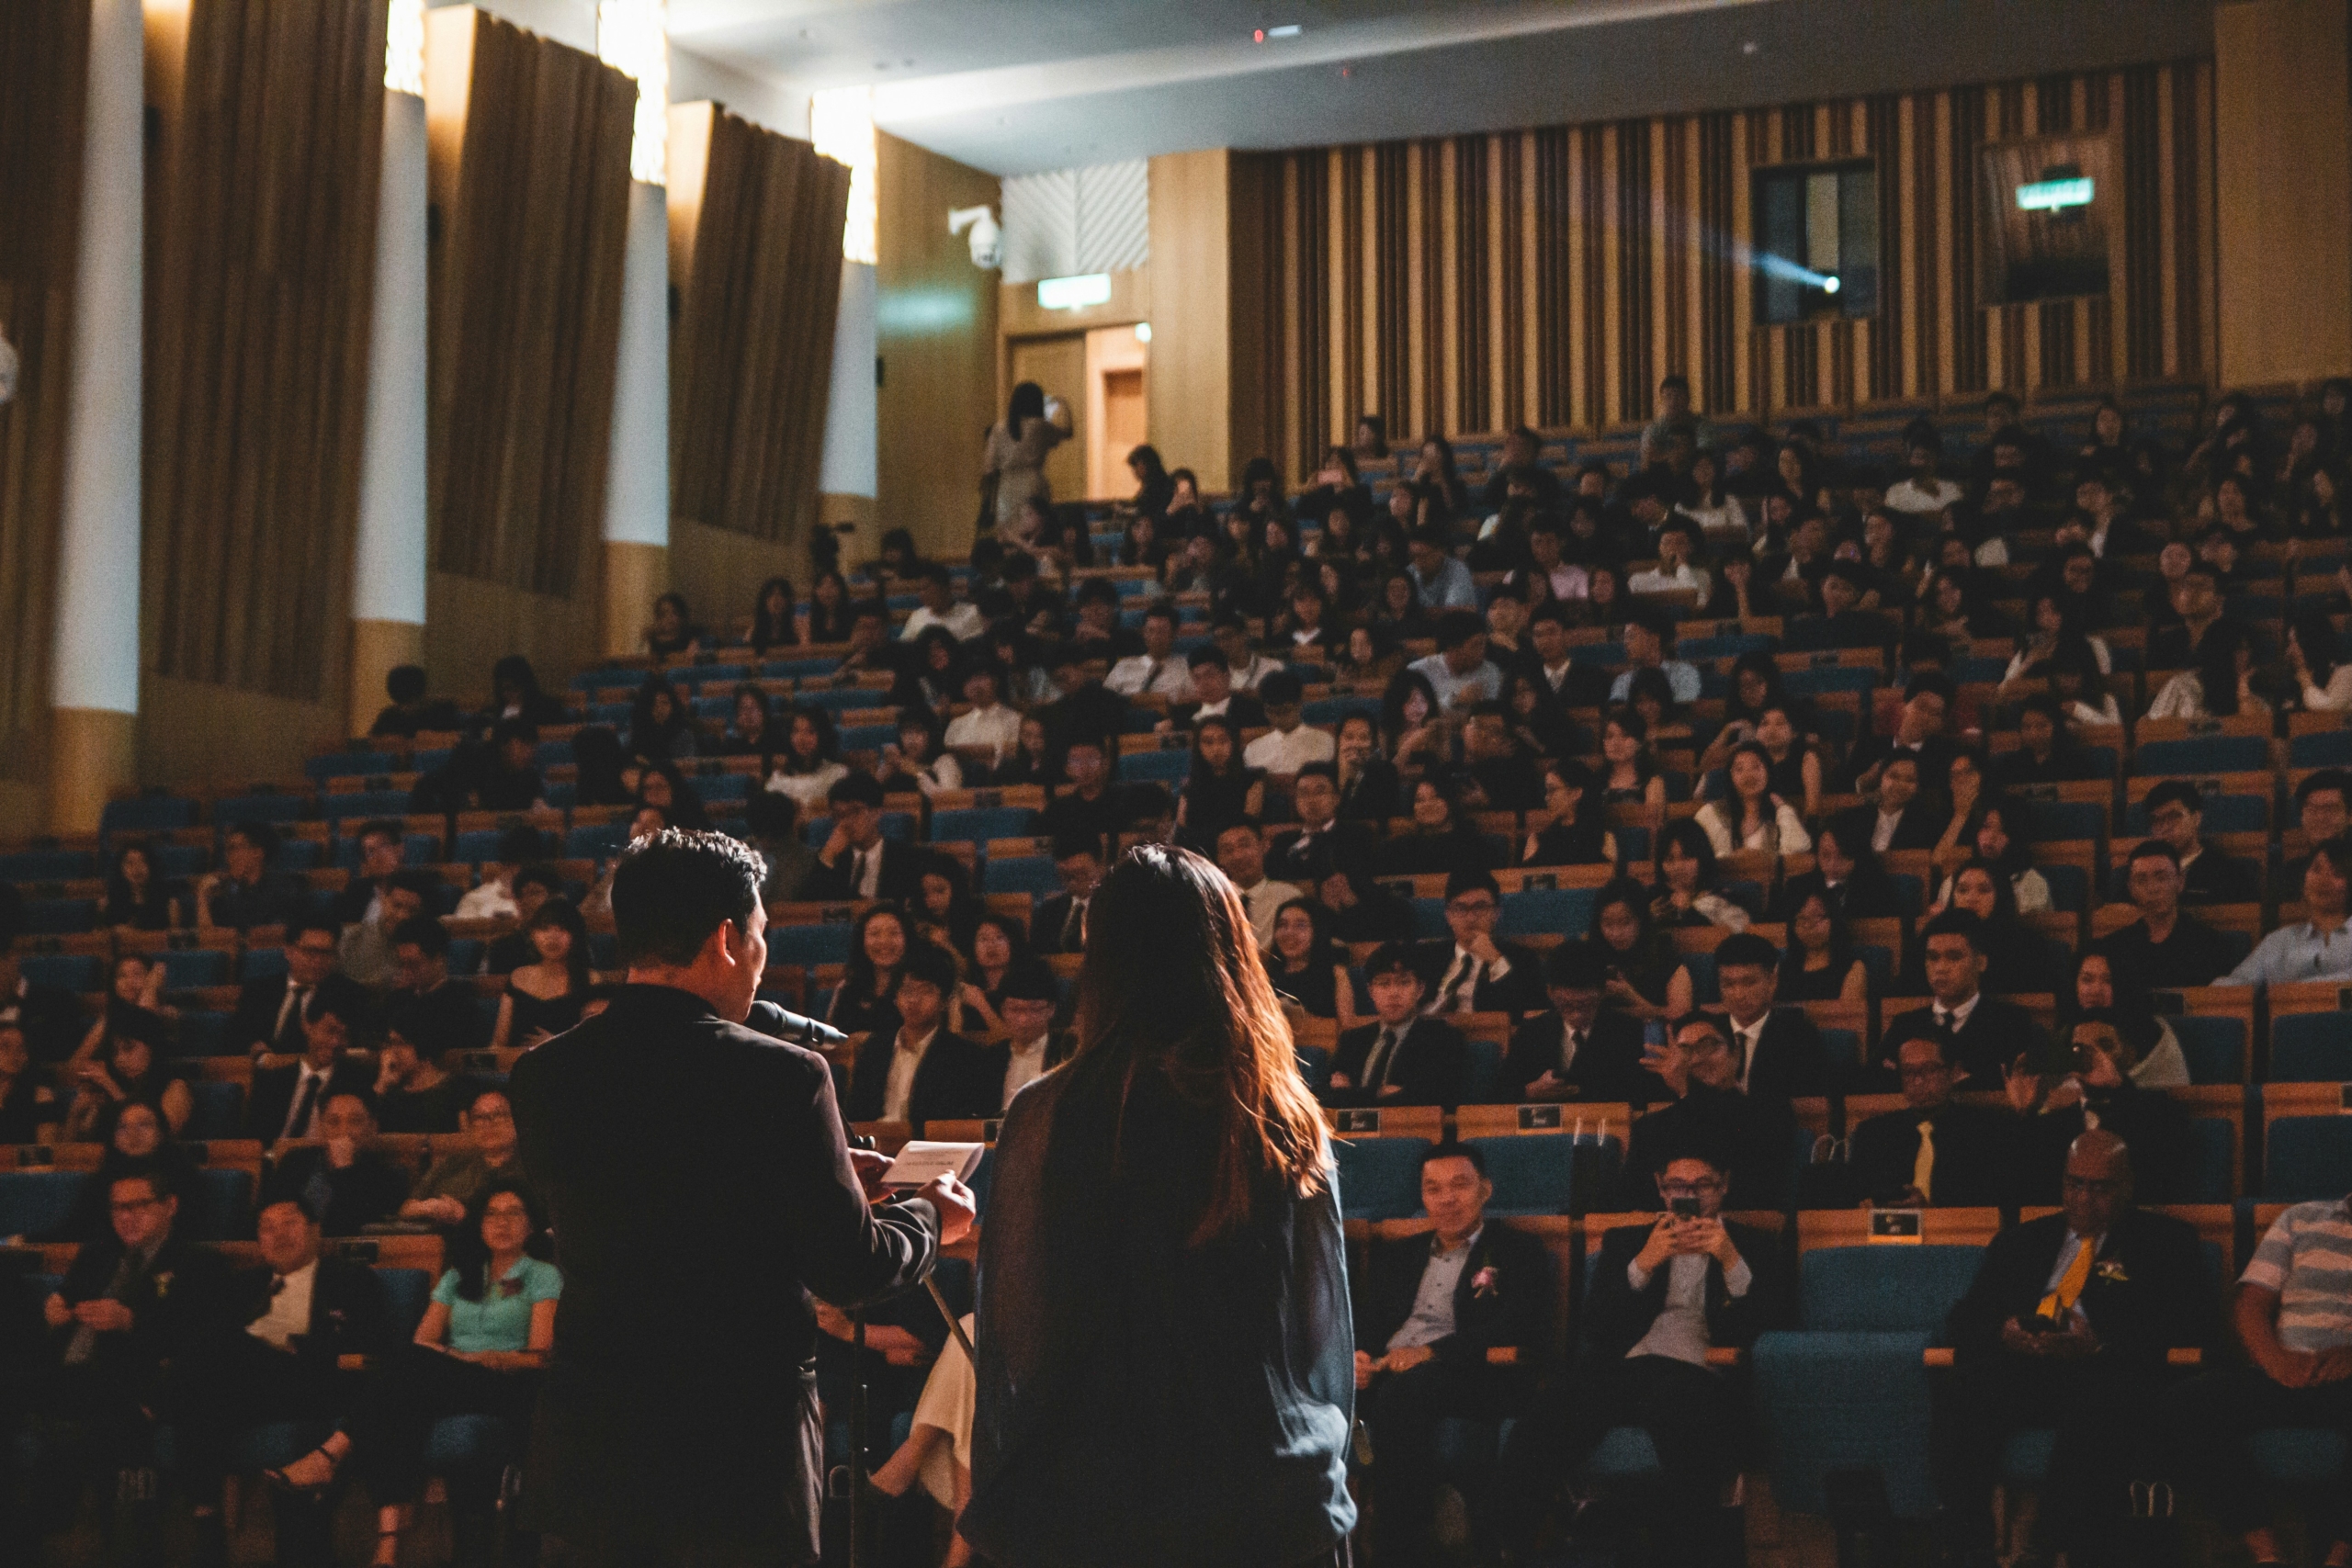 CEOs speaking before audience. Photo by Wan San Yip on Unsplash.